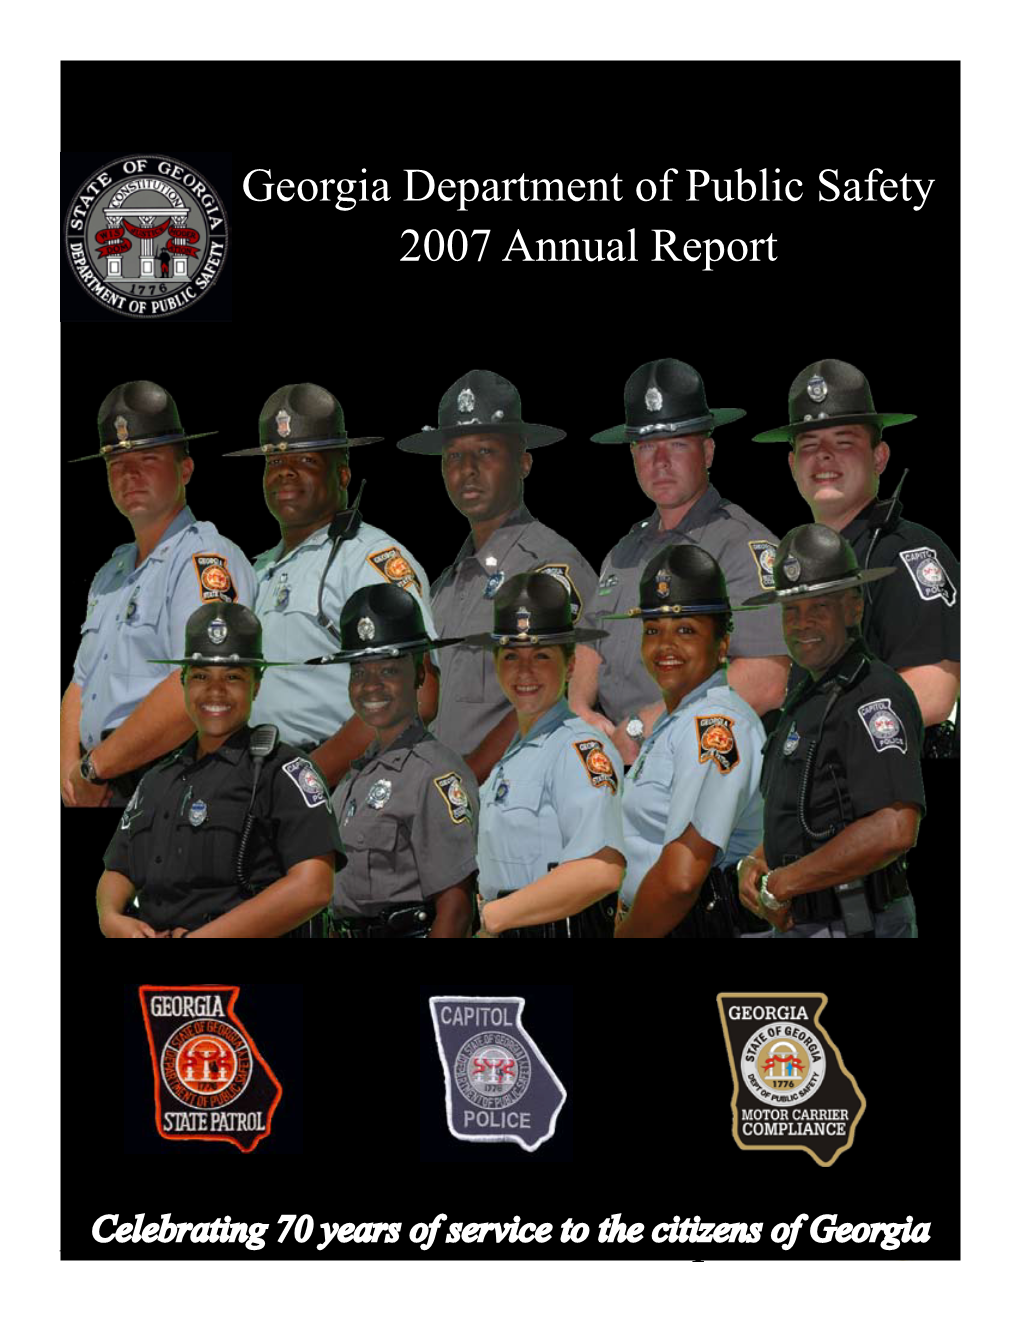 Police Motor Carrier Compliance 1 Georgia Department of Public Safety